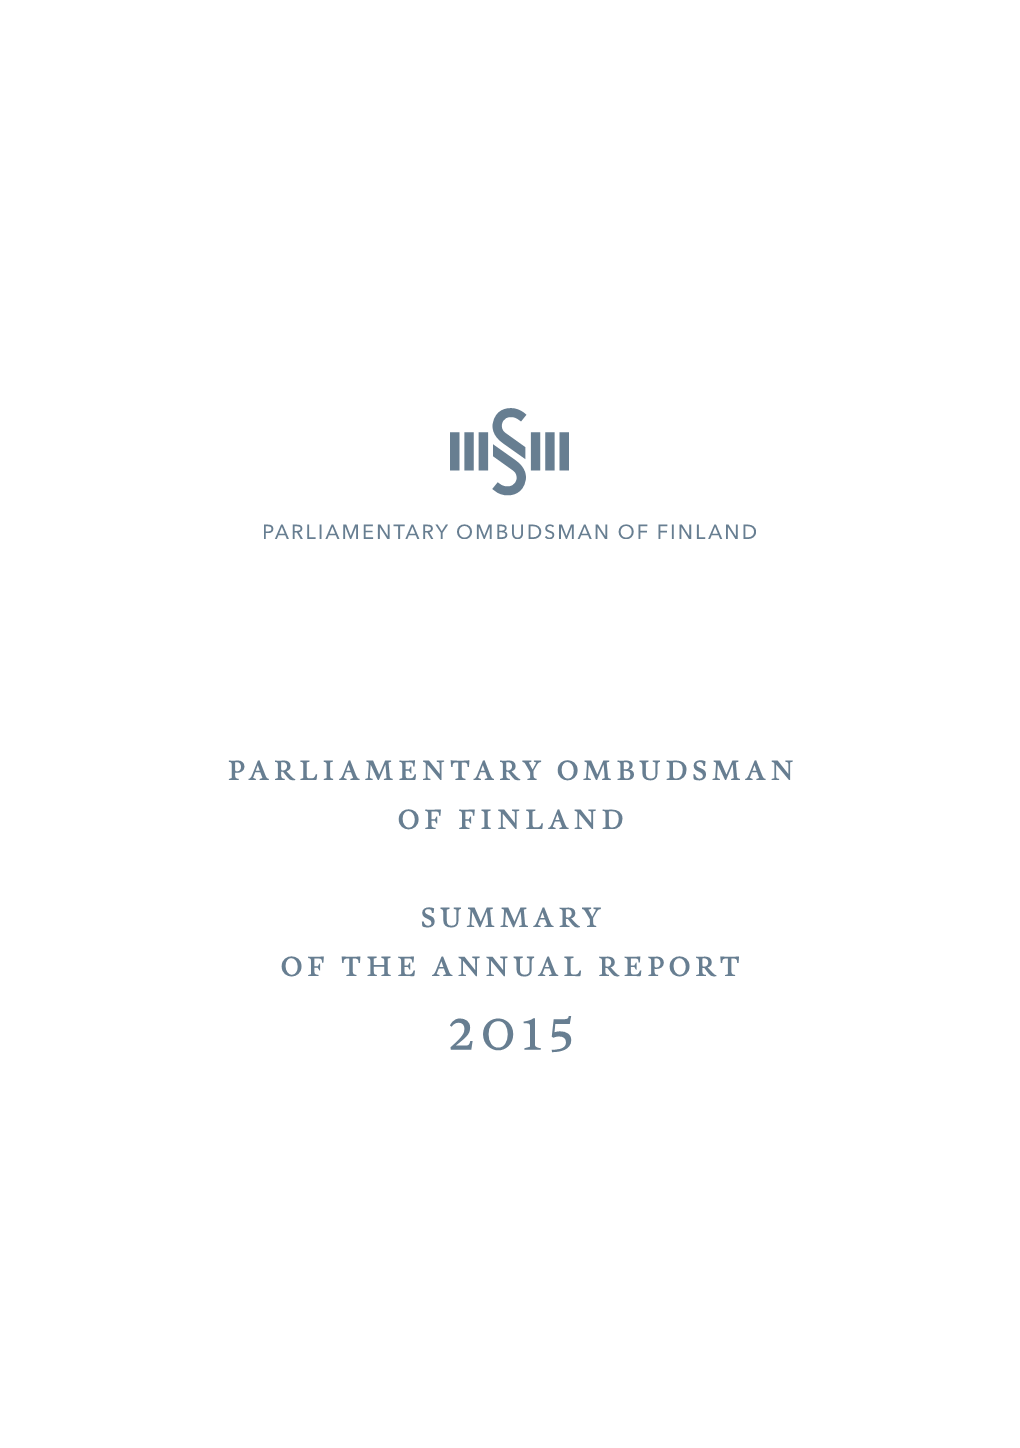 Parliamentary Ombudsman of Finland Summary of the Annual Report